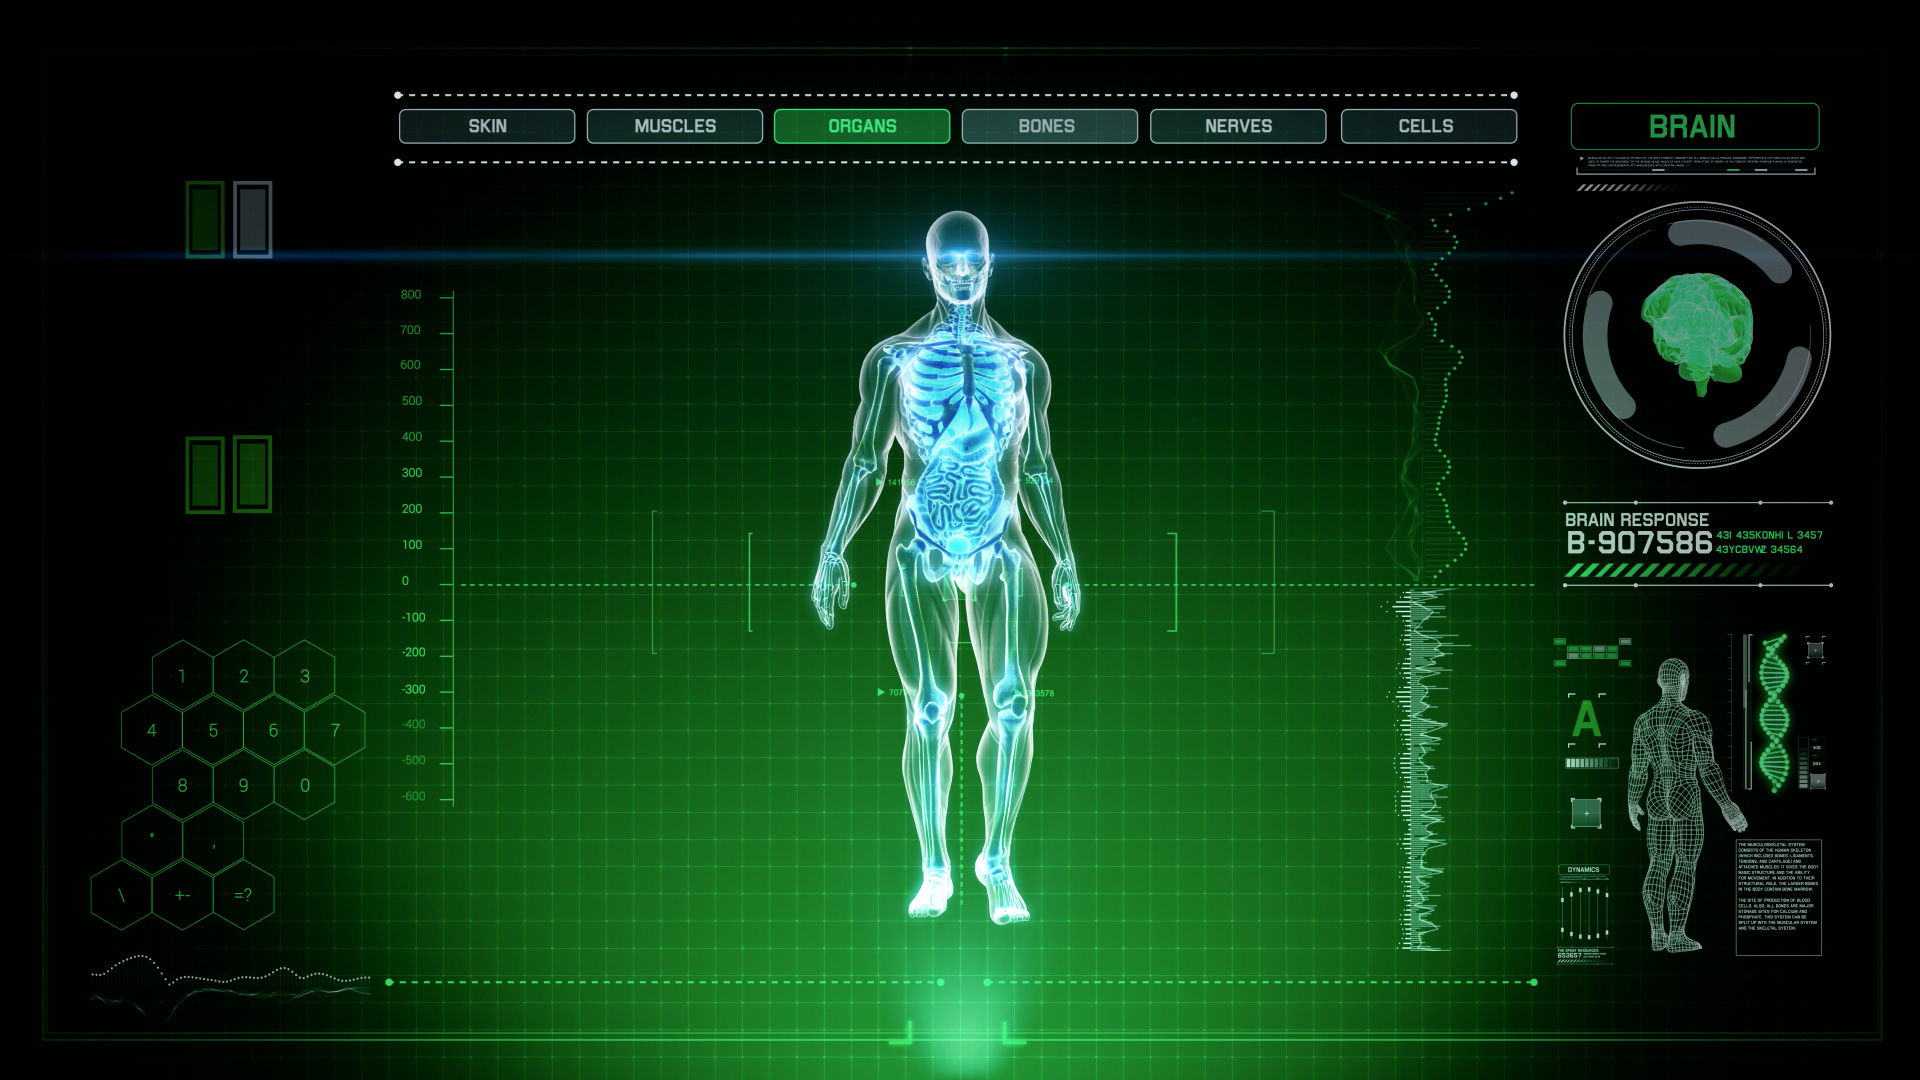 Futuristic Interface Display of Full Body Scan with Human Anatomy of